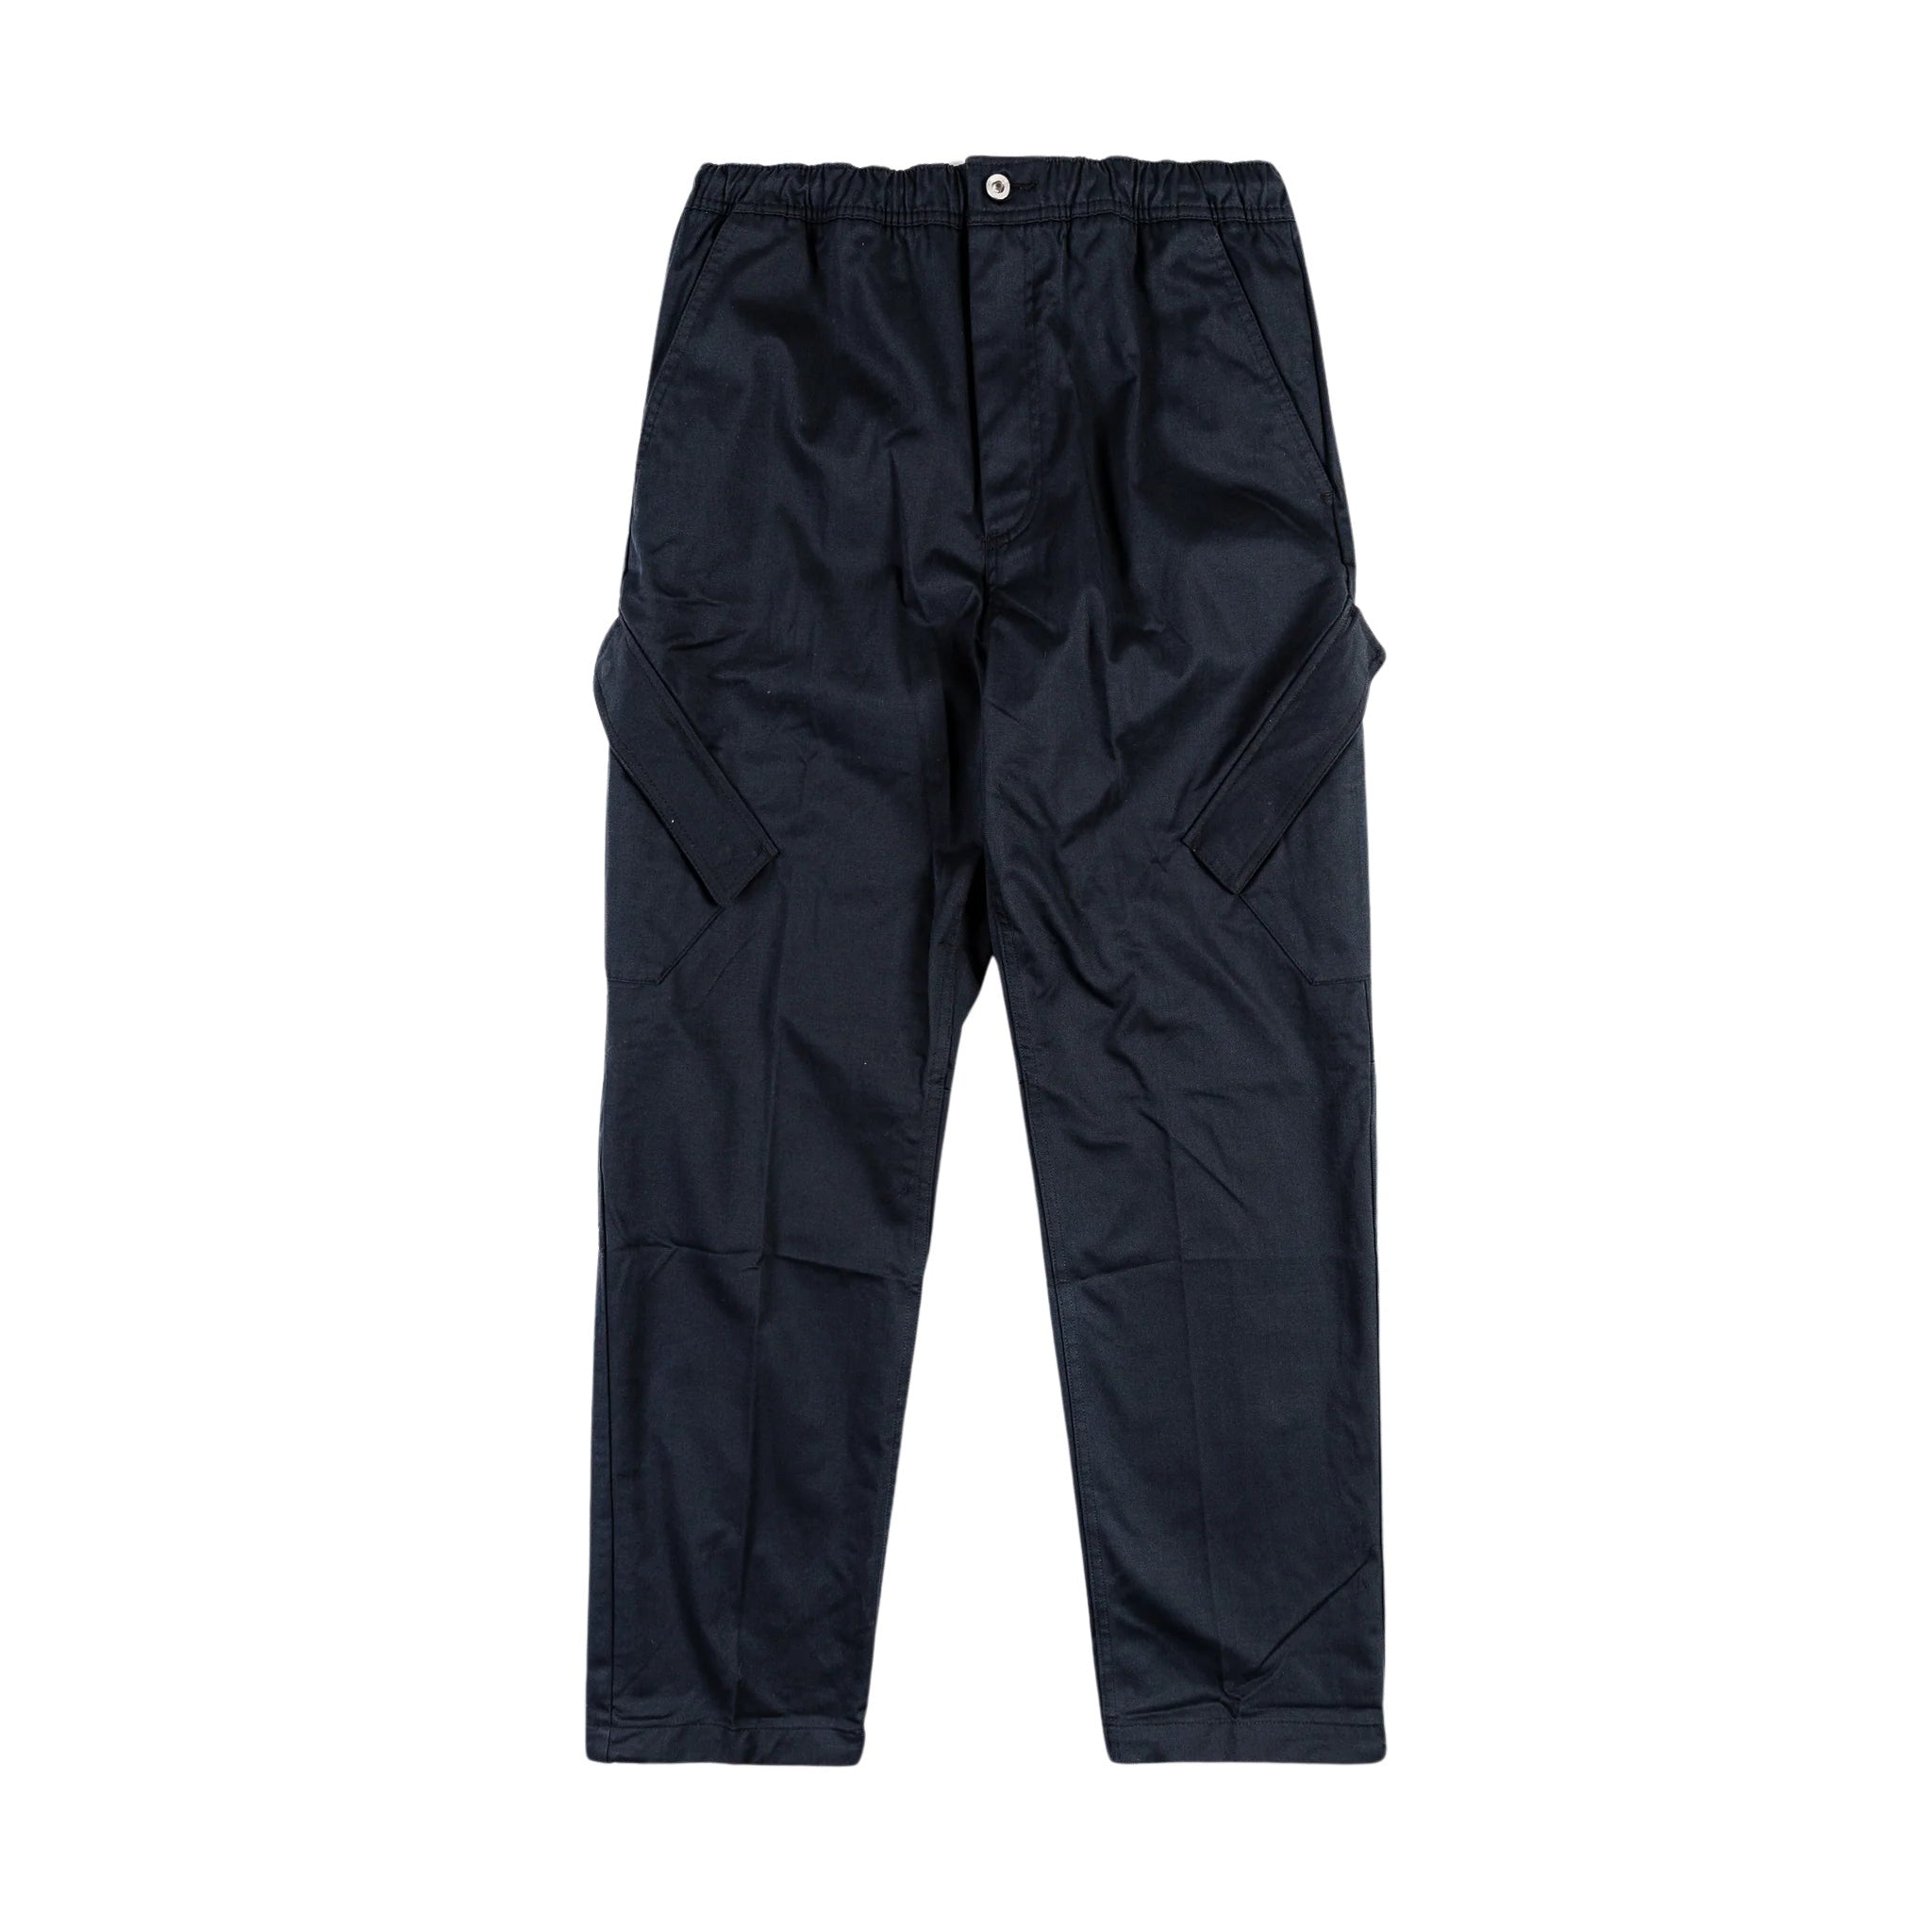 Essential Chicago Trouser Pants